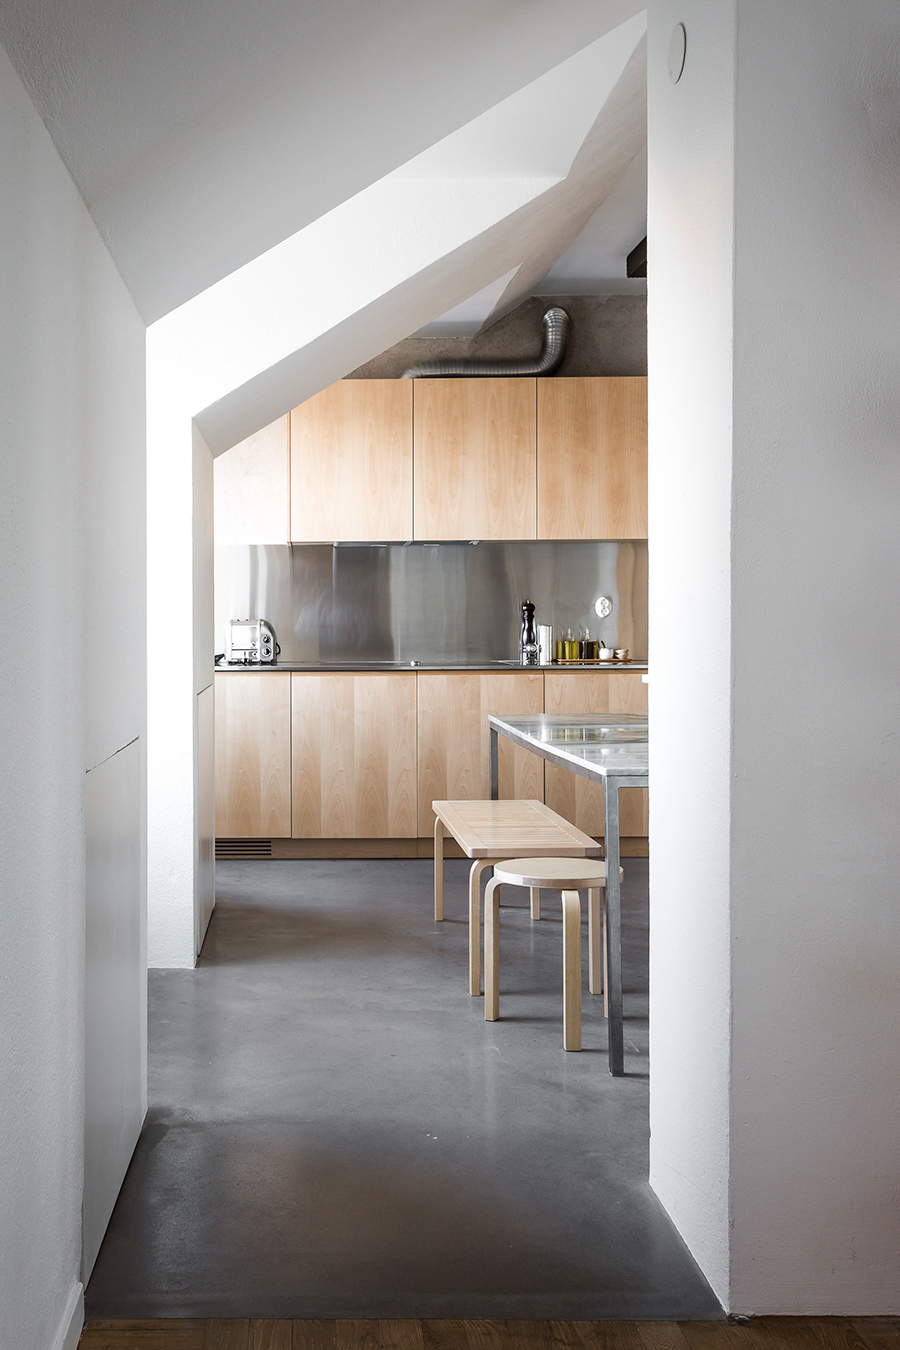 a kitchen of natural wood and steel